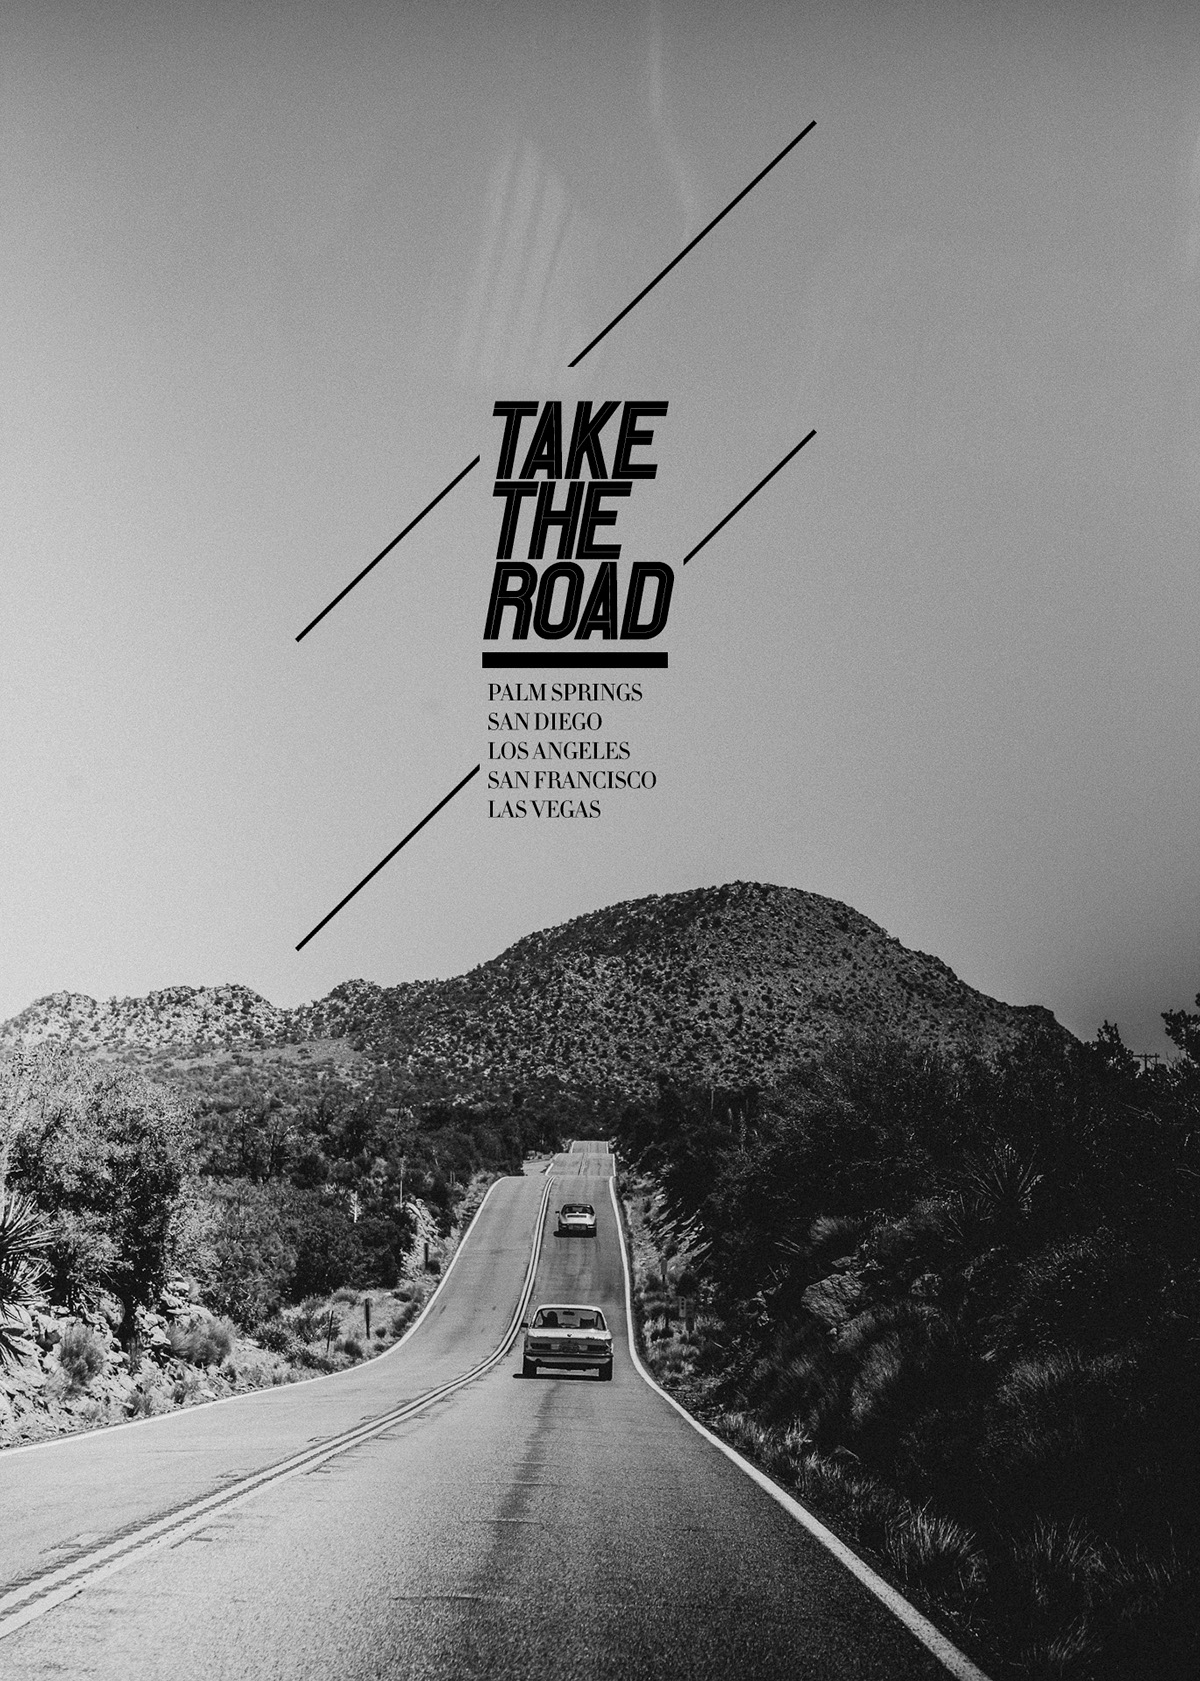 TAKE THE ROAD on Behance